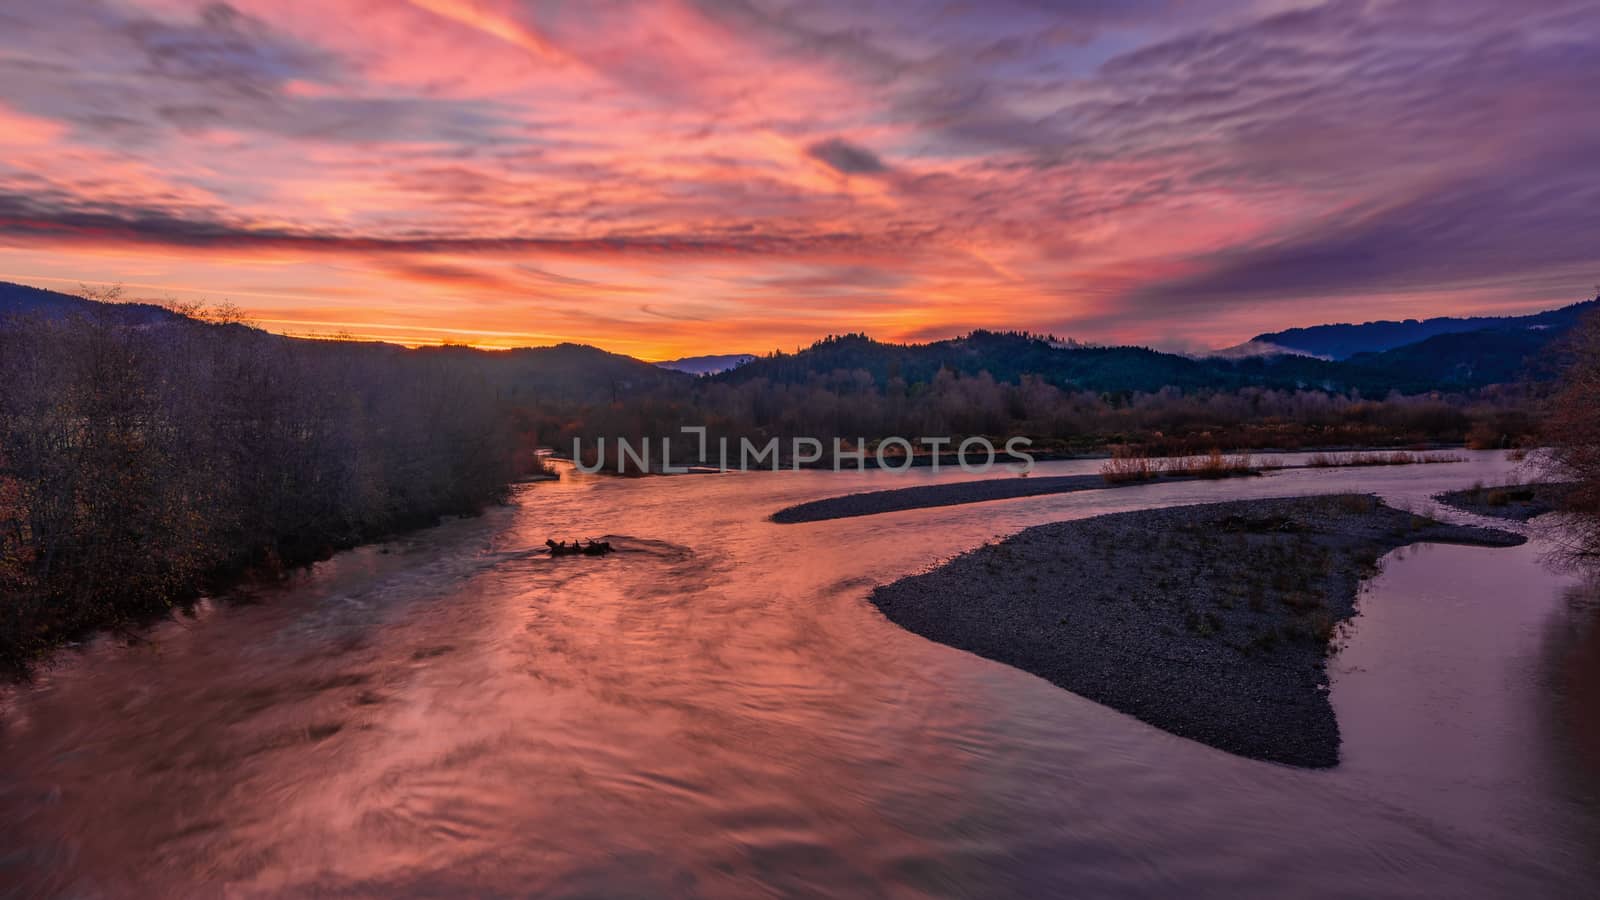 The Mad River, Humboldt County, California, at Sunrise by backyard_photography